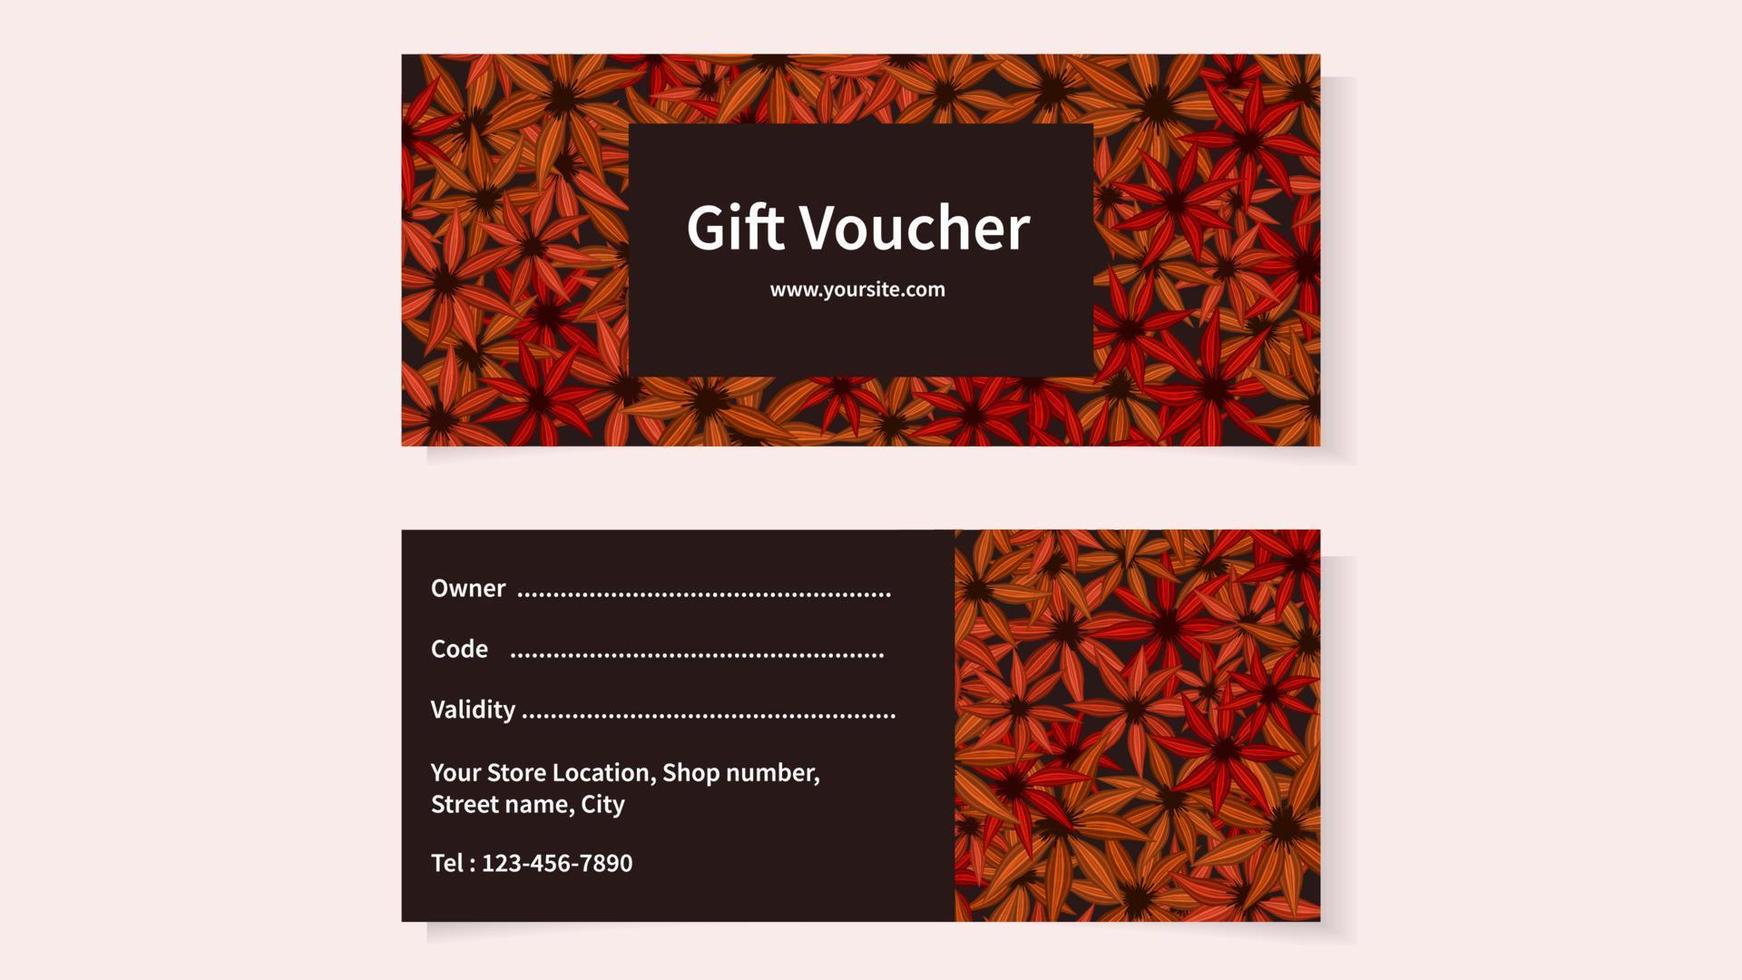 Gift certificate voucher floral flowers coupons discounts sales offers vector